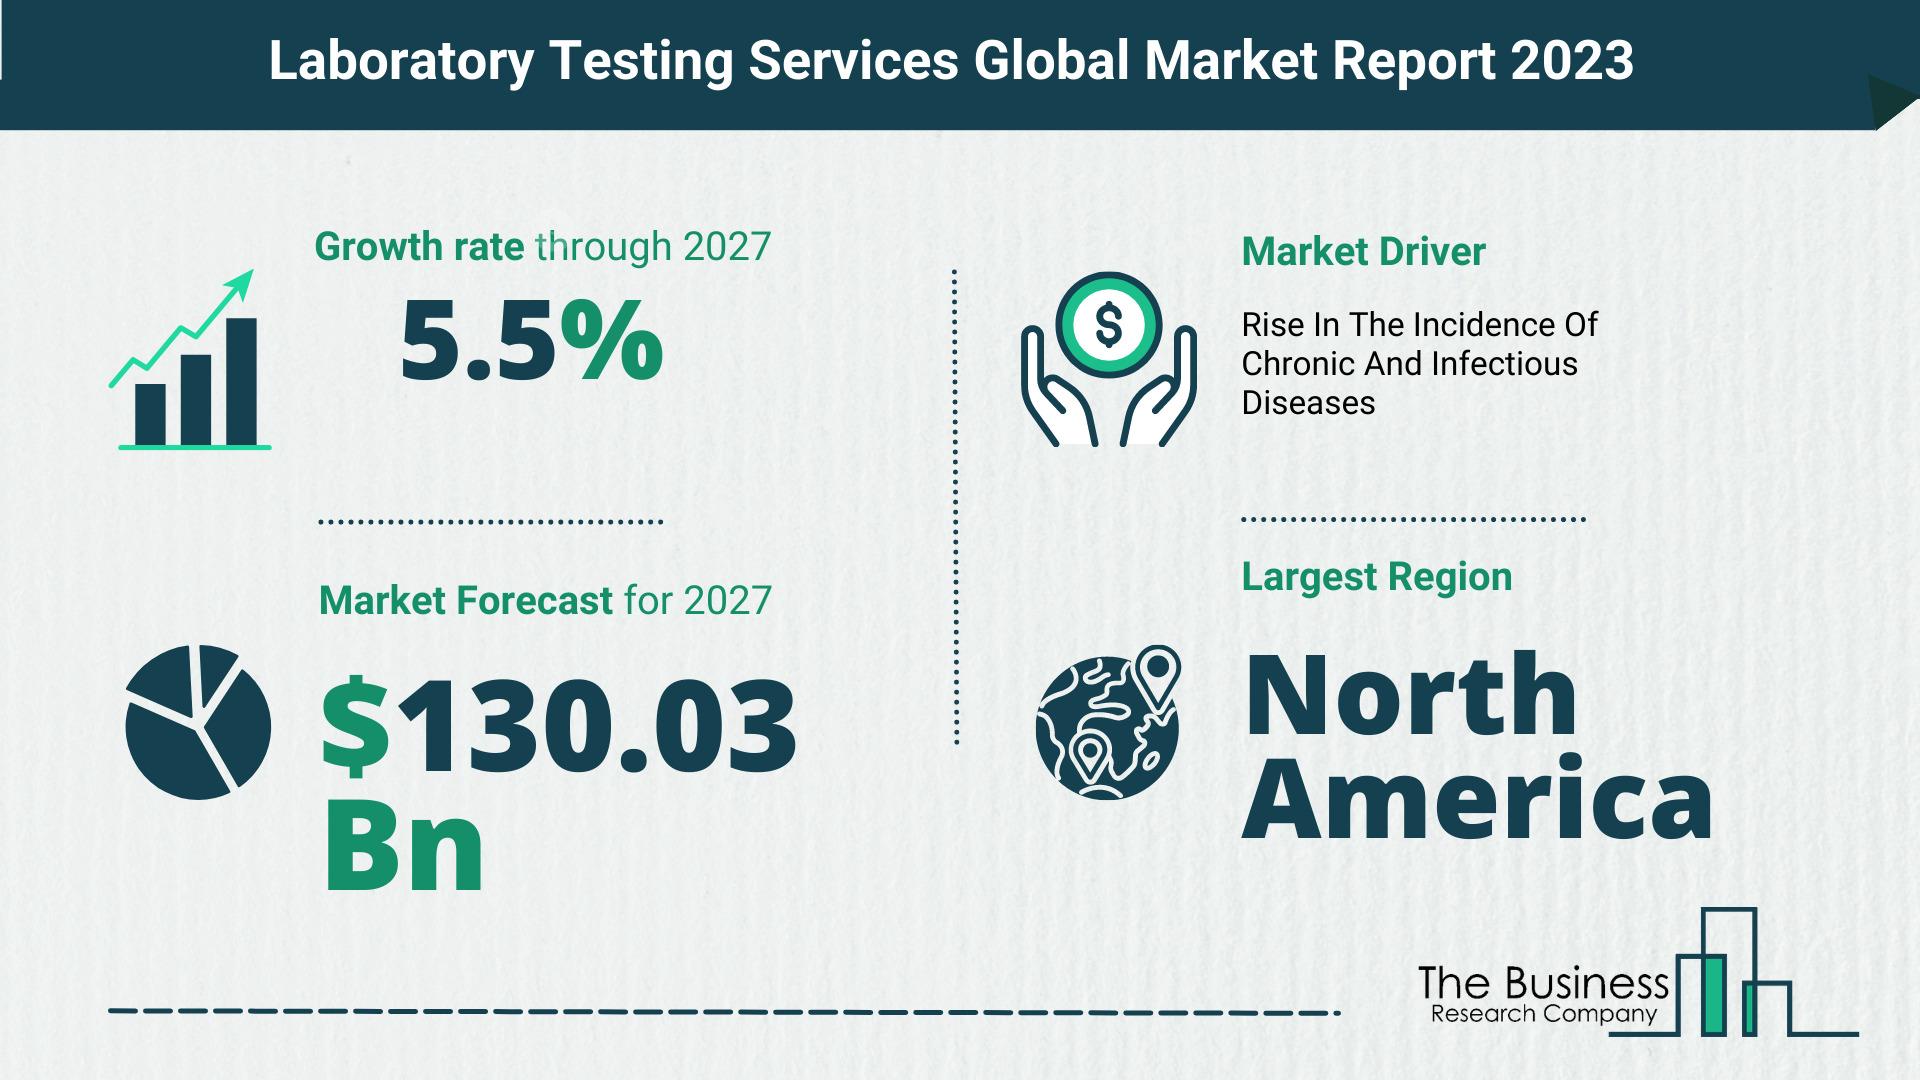 What Will The Laboratory Testing Services Market Look Like In 2023?